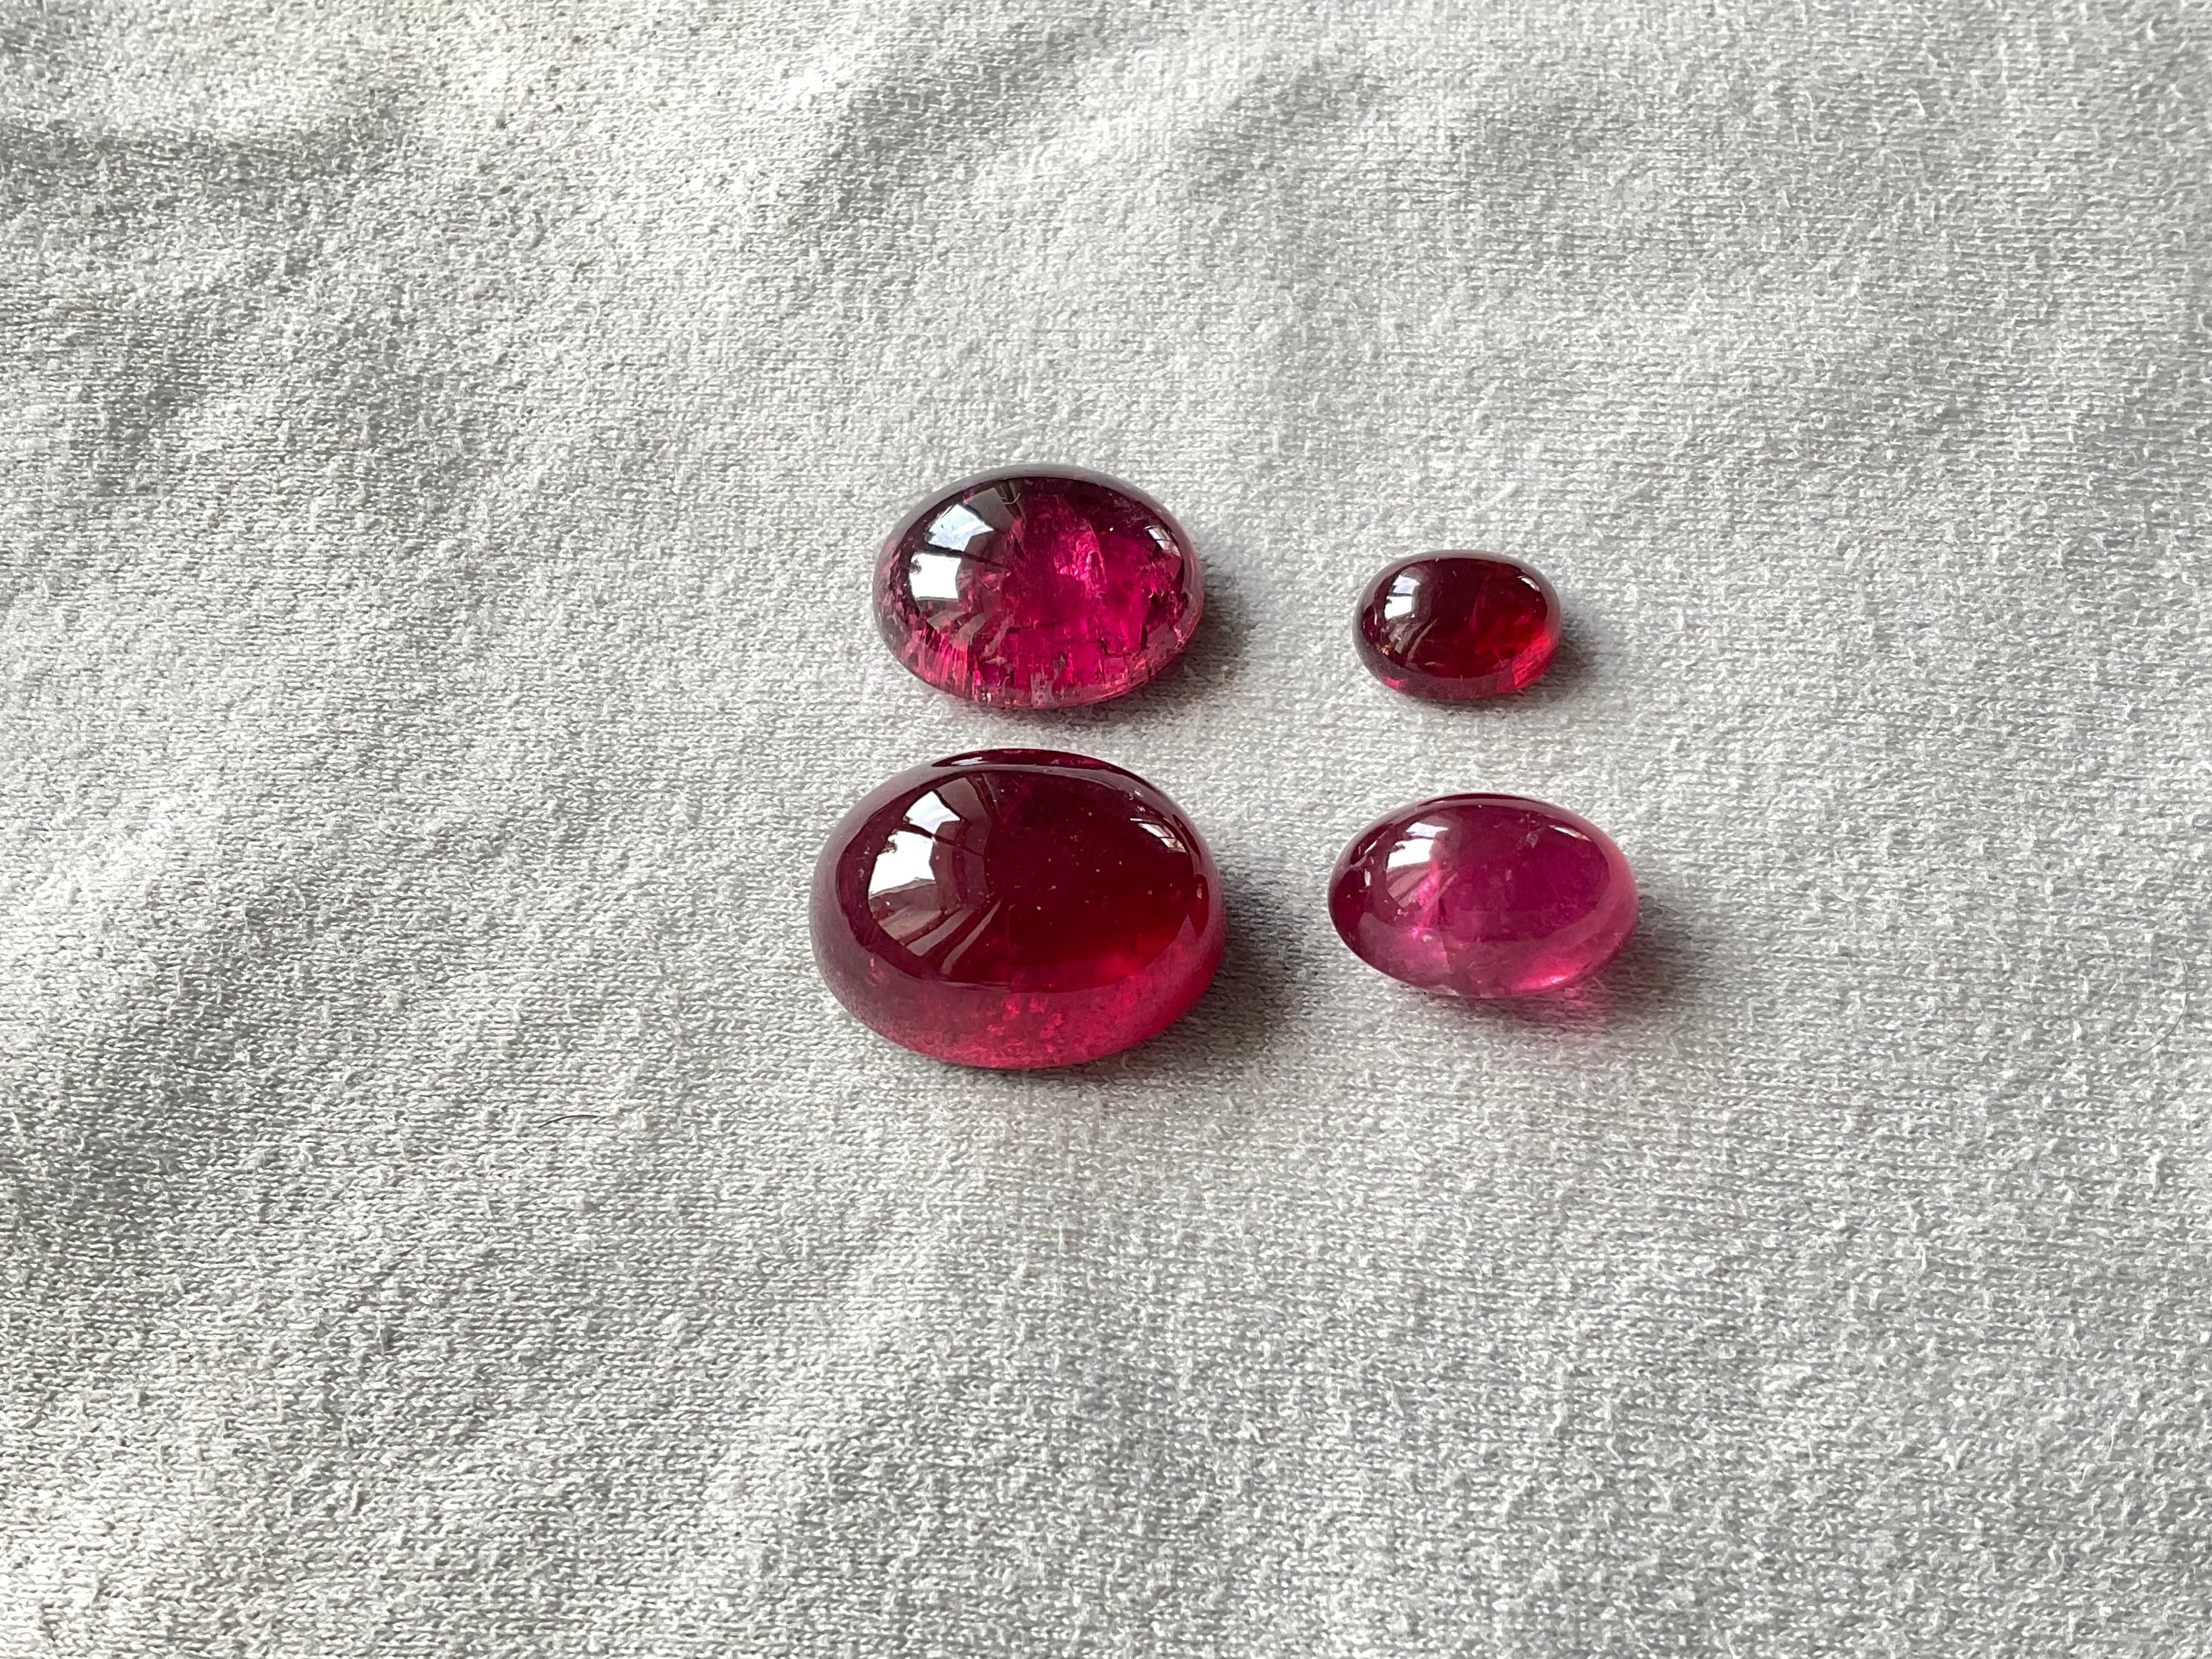 92.86 Carats Top Quality Rubellite Tourmaline Cabochon 4 Pieces Natural Gemstone For Sale 3